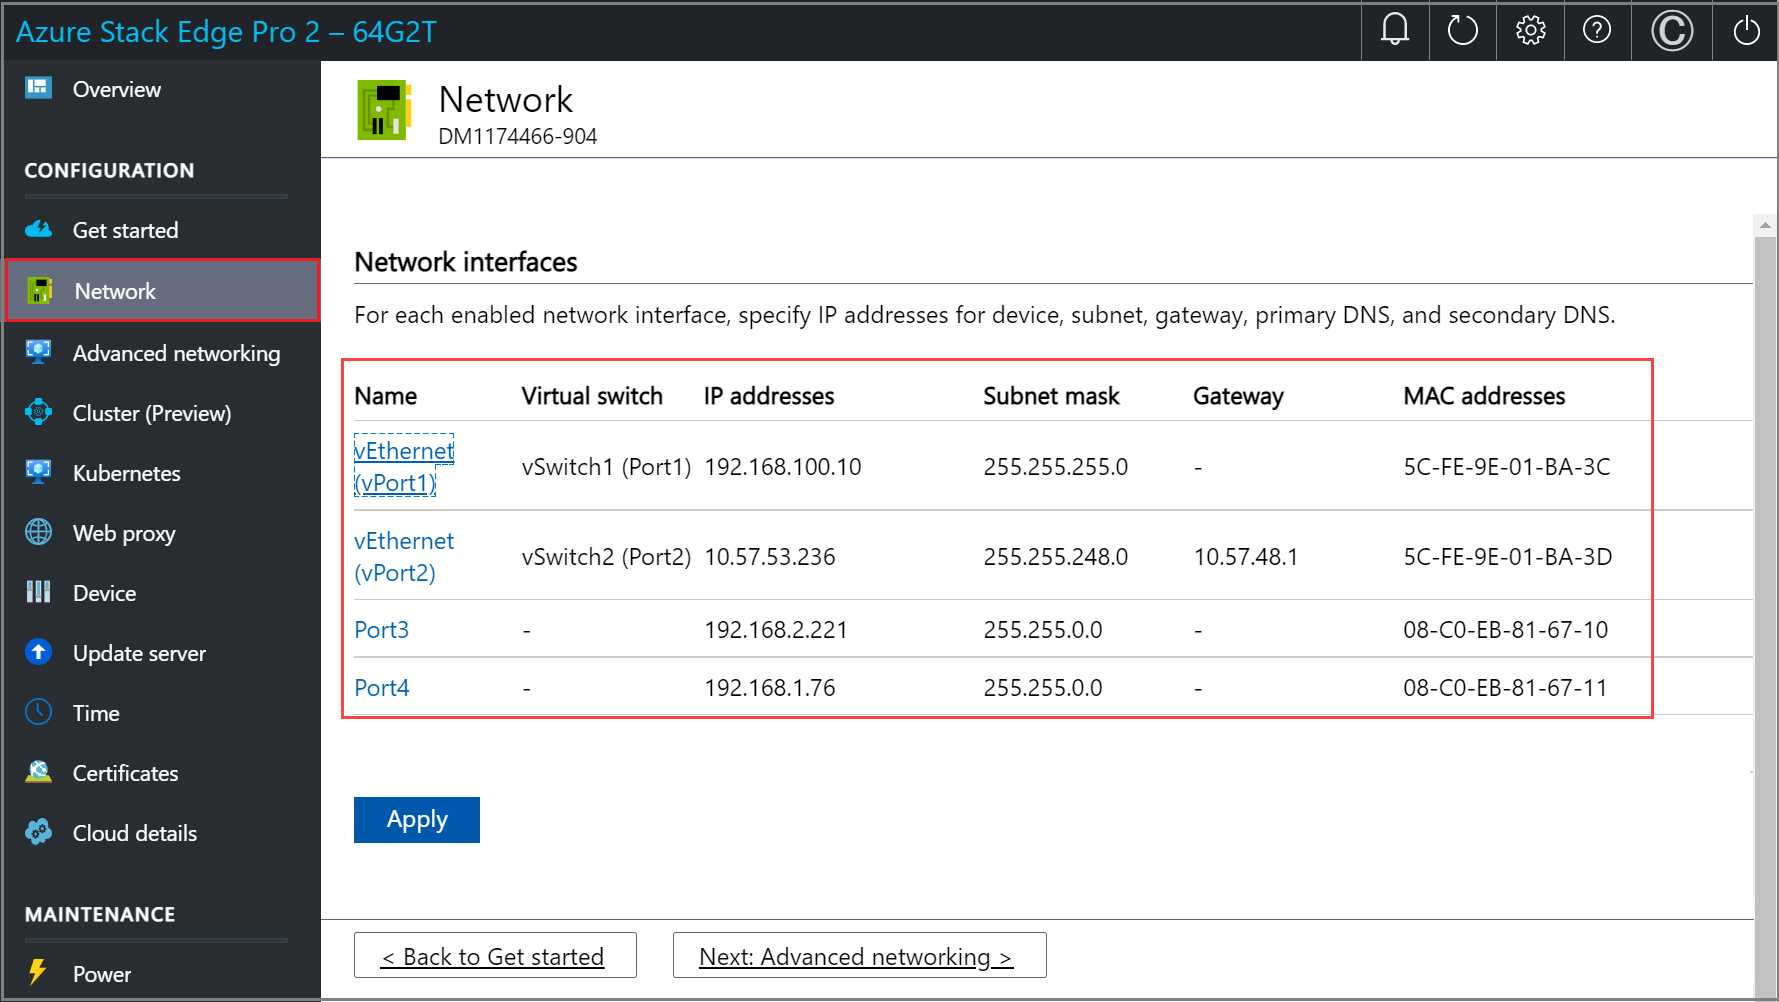 Screenshot of local web UI "Network" page updated.